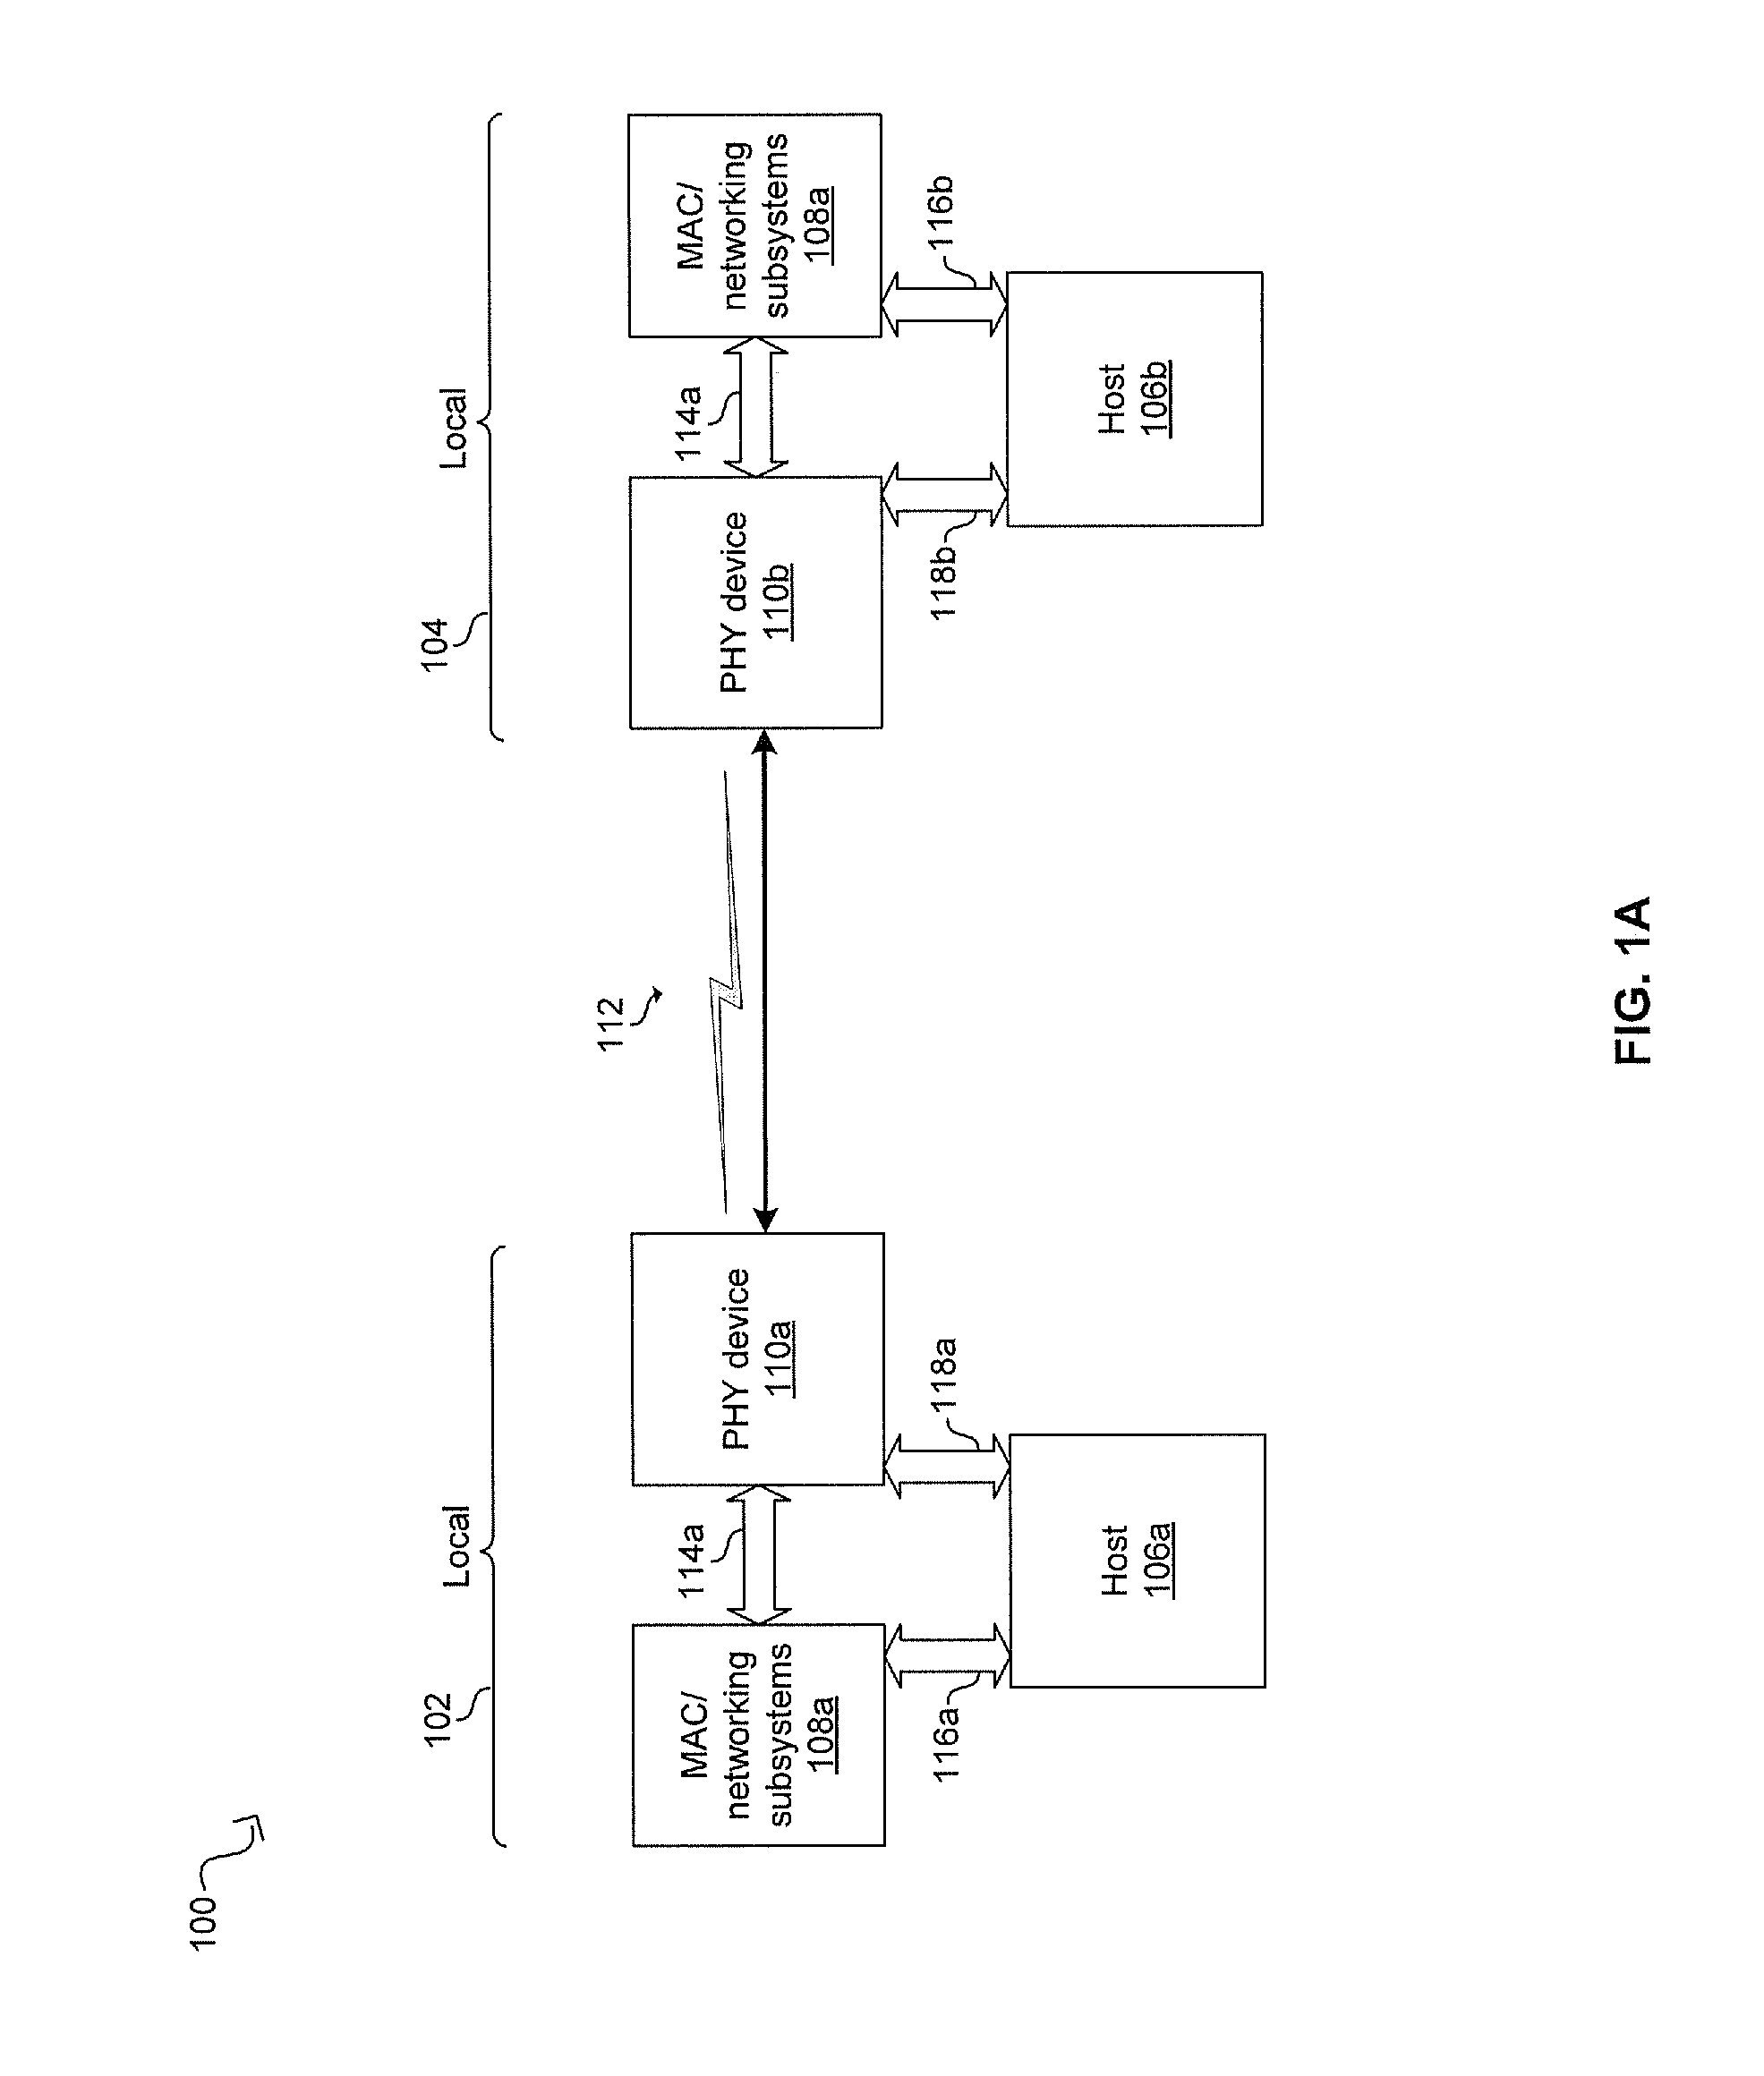 Method and system for determining physical layer traversal time